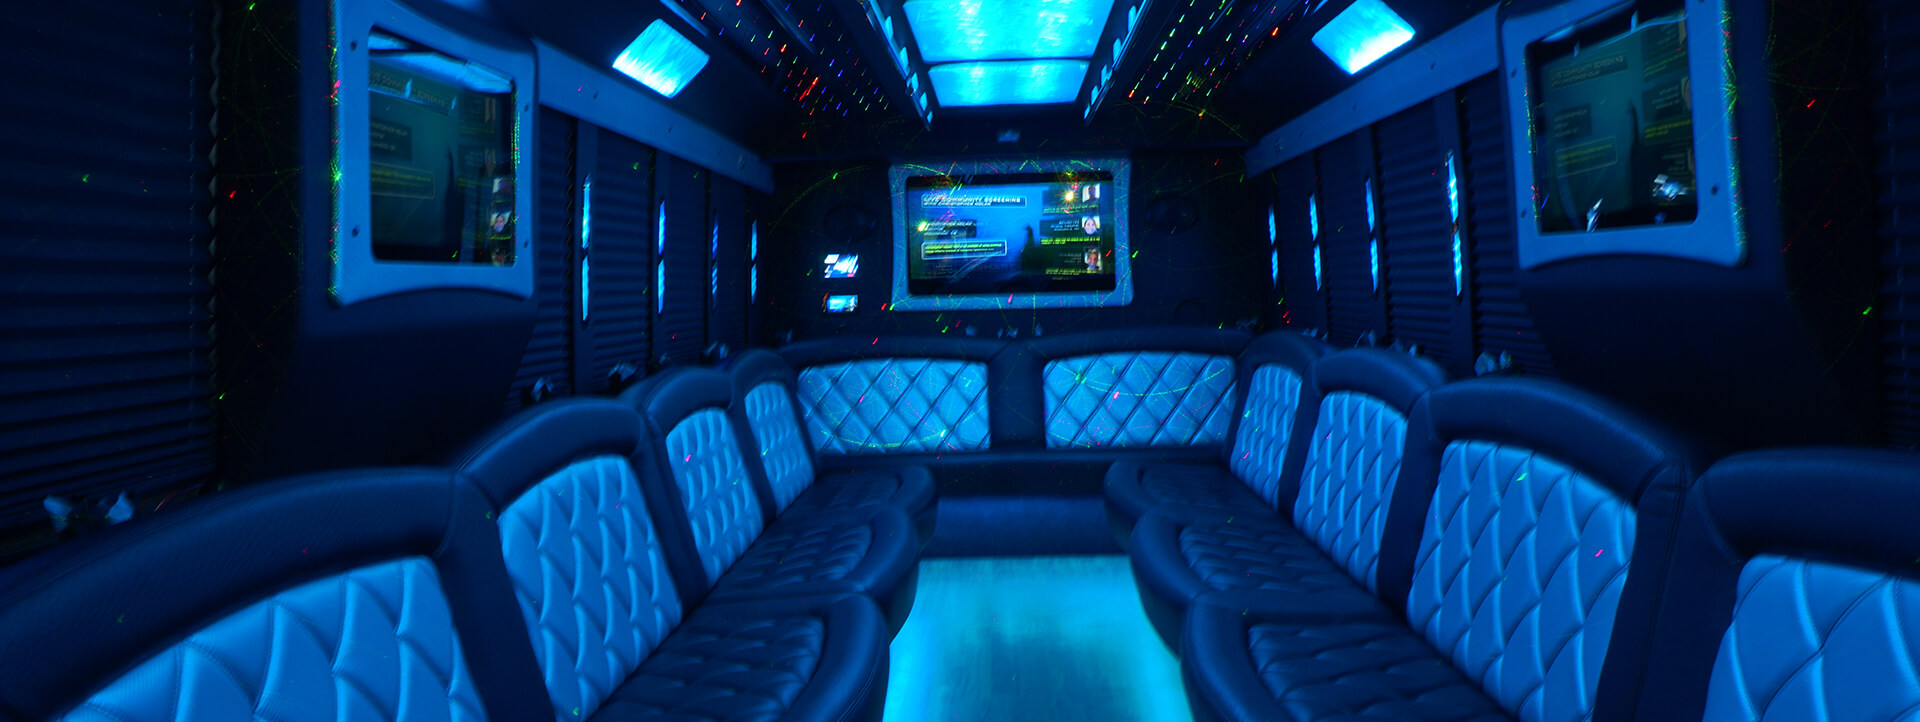 limousine interior ideal for party rides in Maple Shade, NJ 